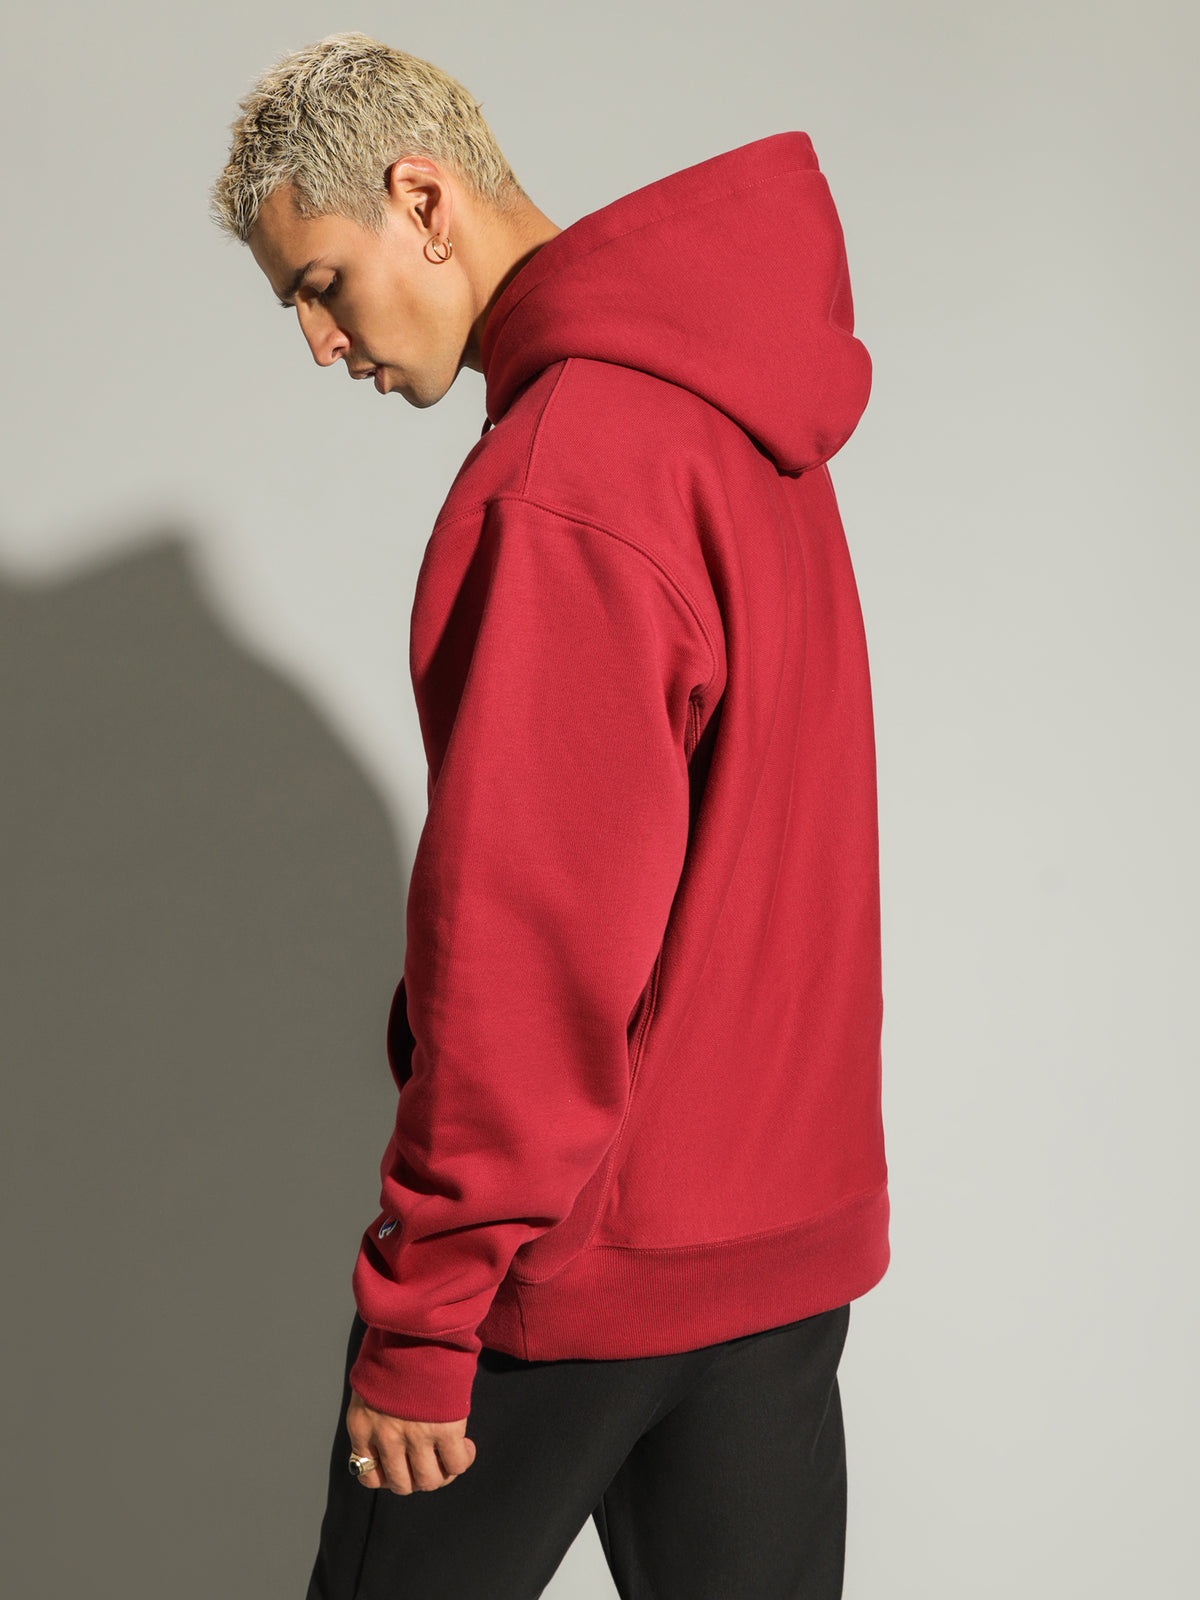 Reverse Weave Archive Hoodie in Cranberry Tart